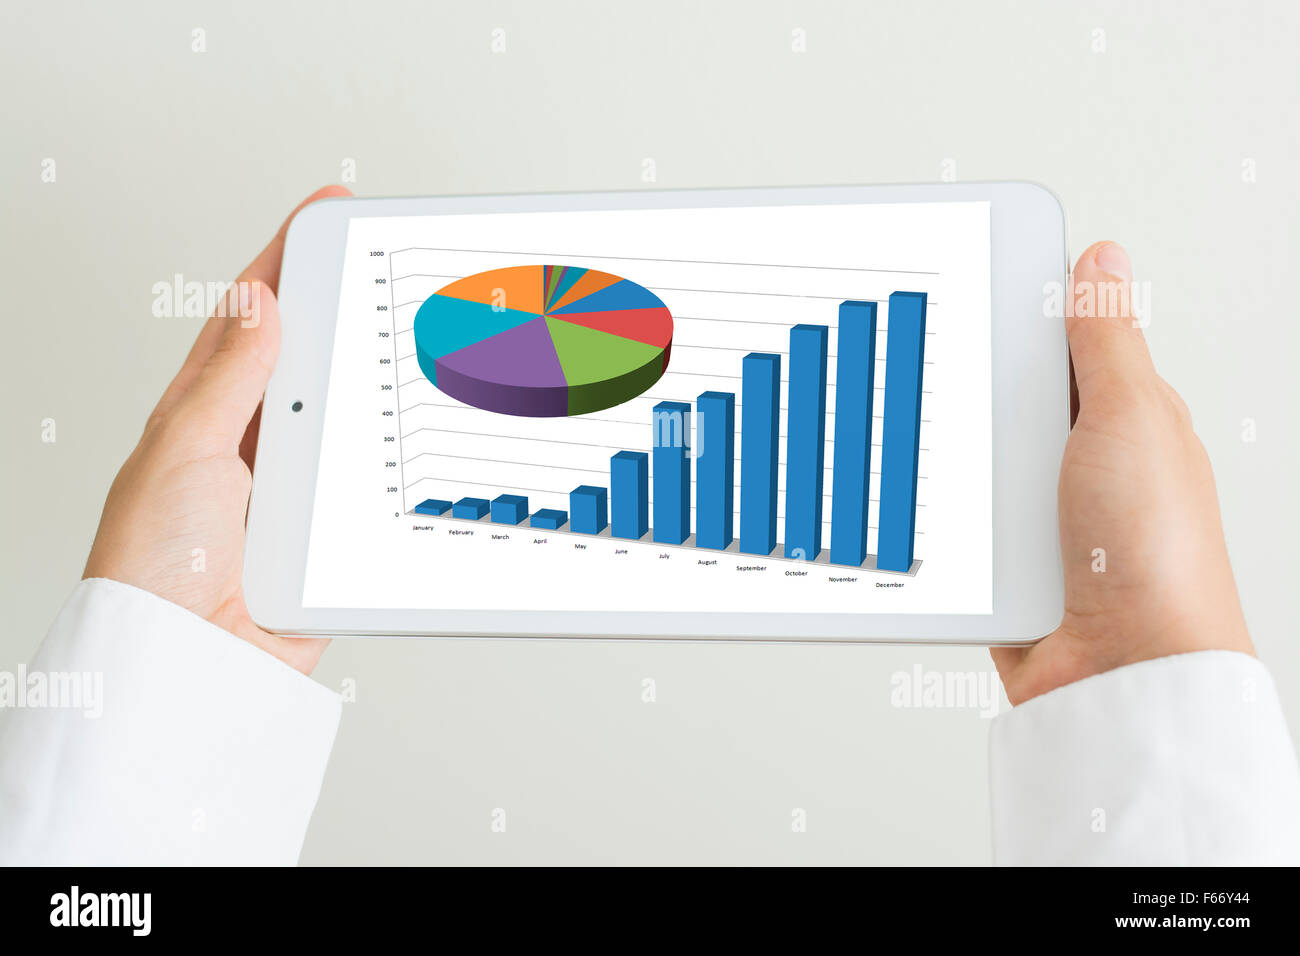 hands hold the tablet as a business tool Stock Photo